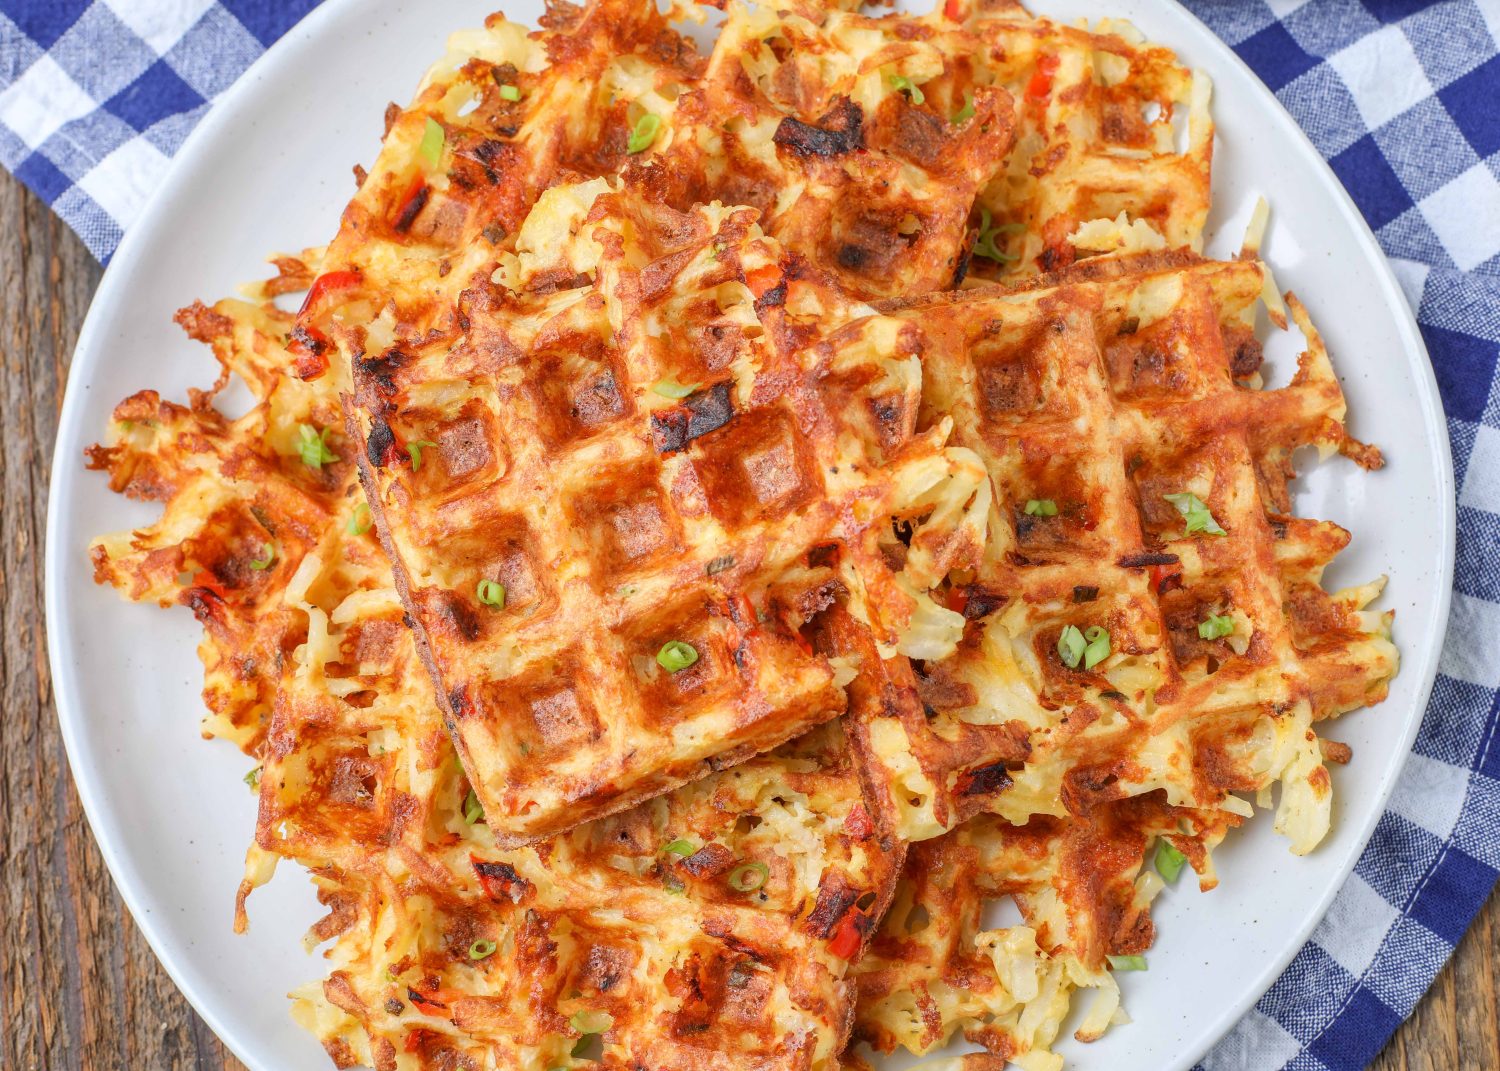 waffled hash browns with rosemary - a hint of rosemary